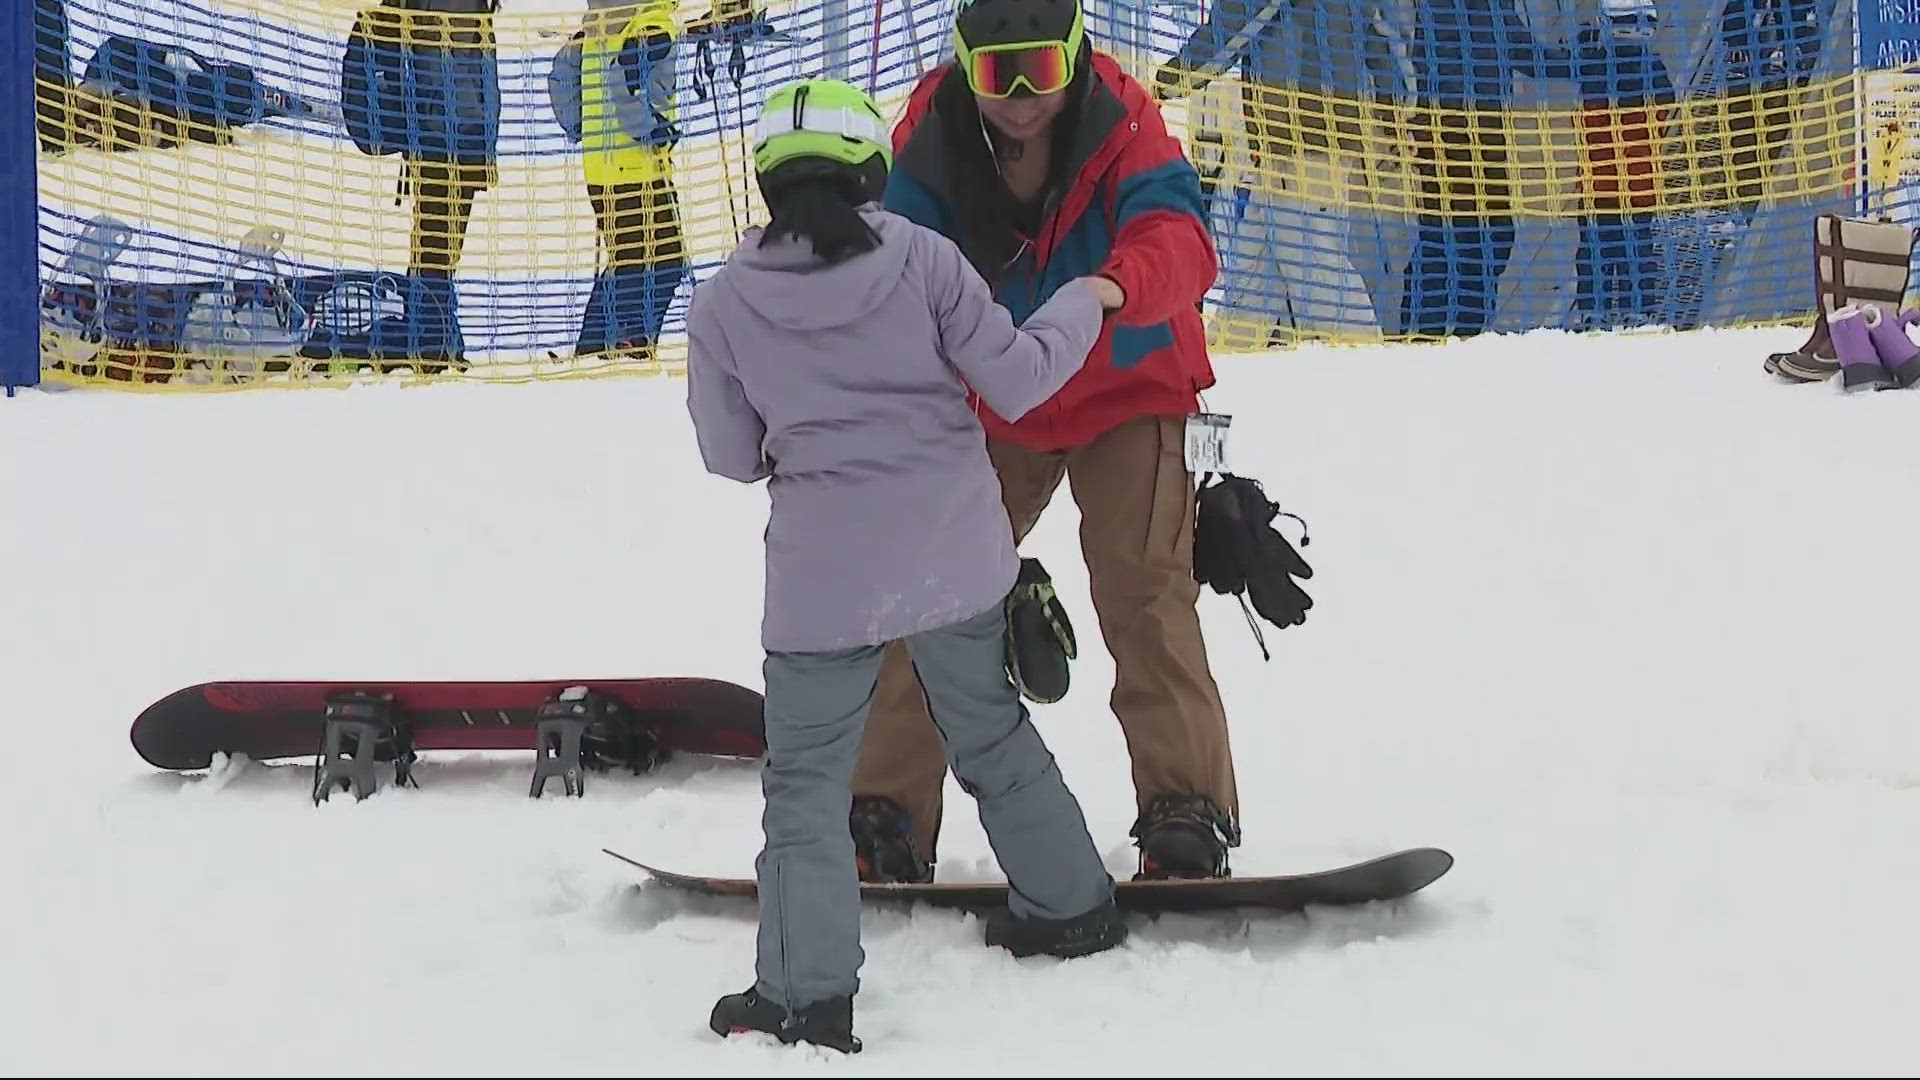 Snowdays Foundation has partnered with youth organizations to teach kids how to snowboard. Many whom never been to the snowy mountains of Mount Hood.